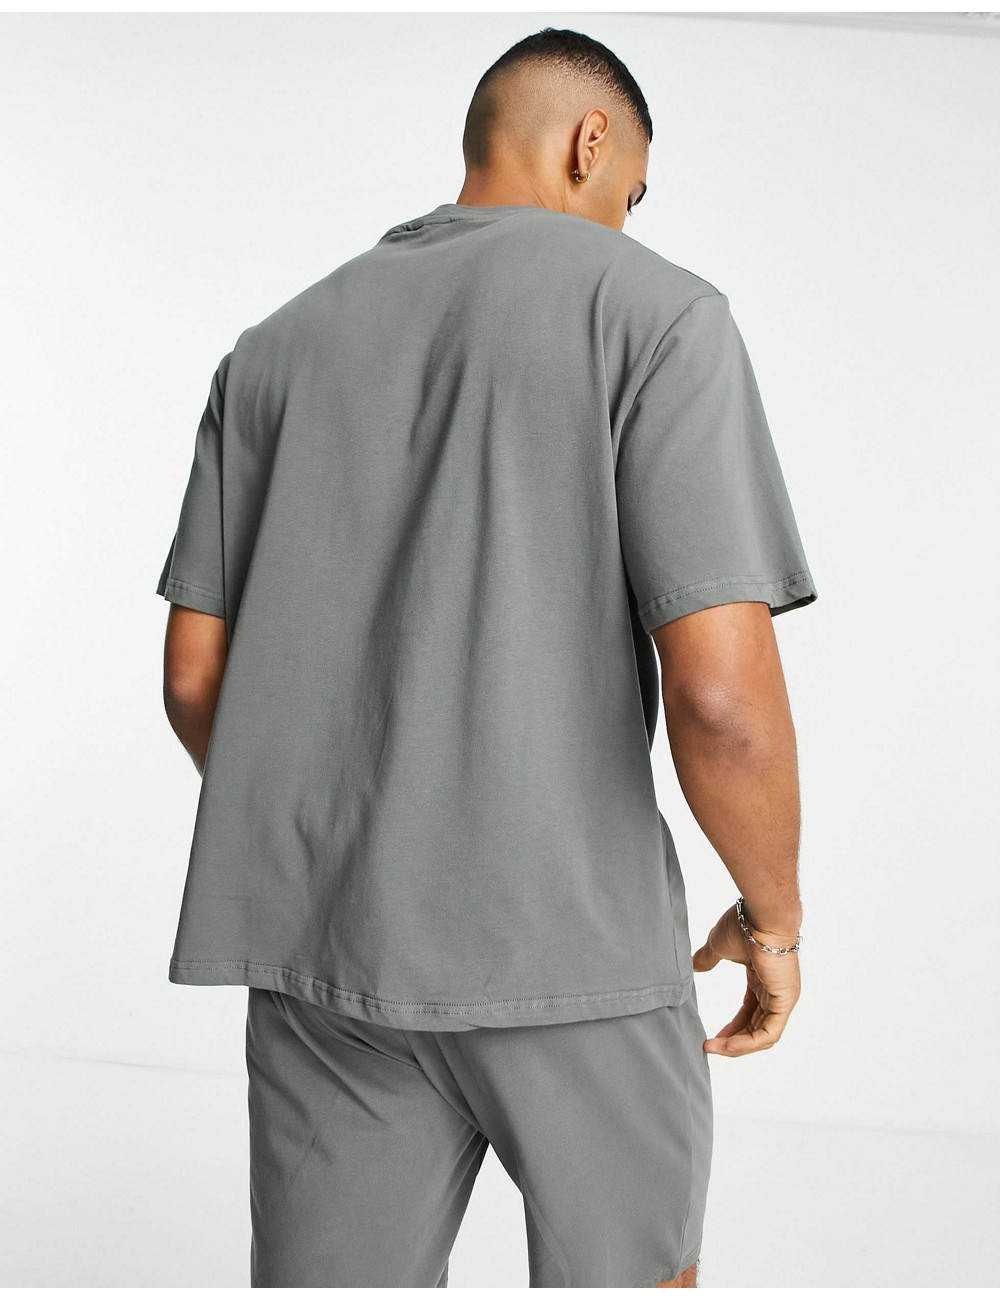 Only & Sons loungewear...